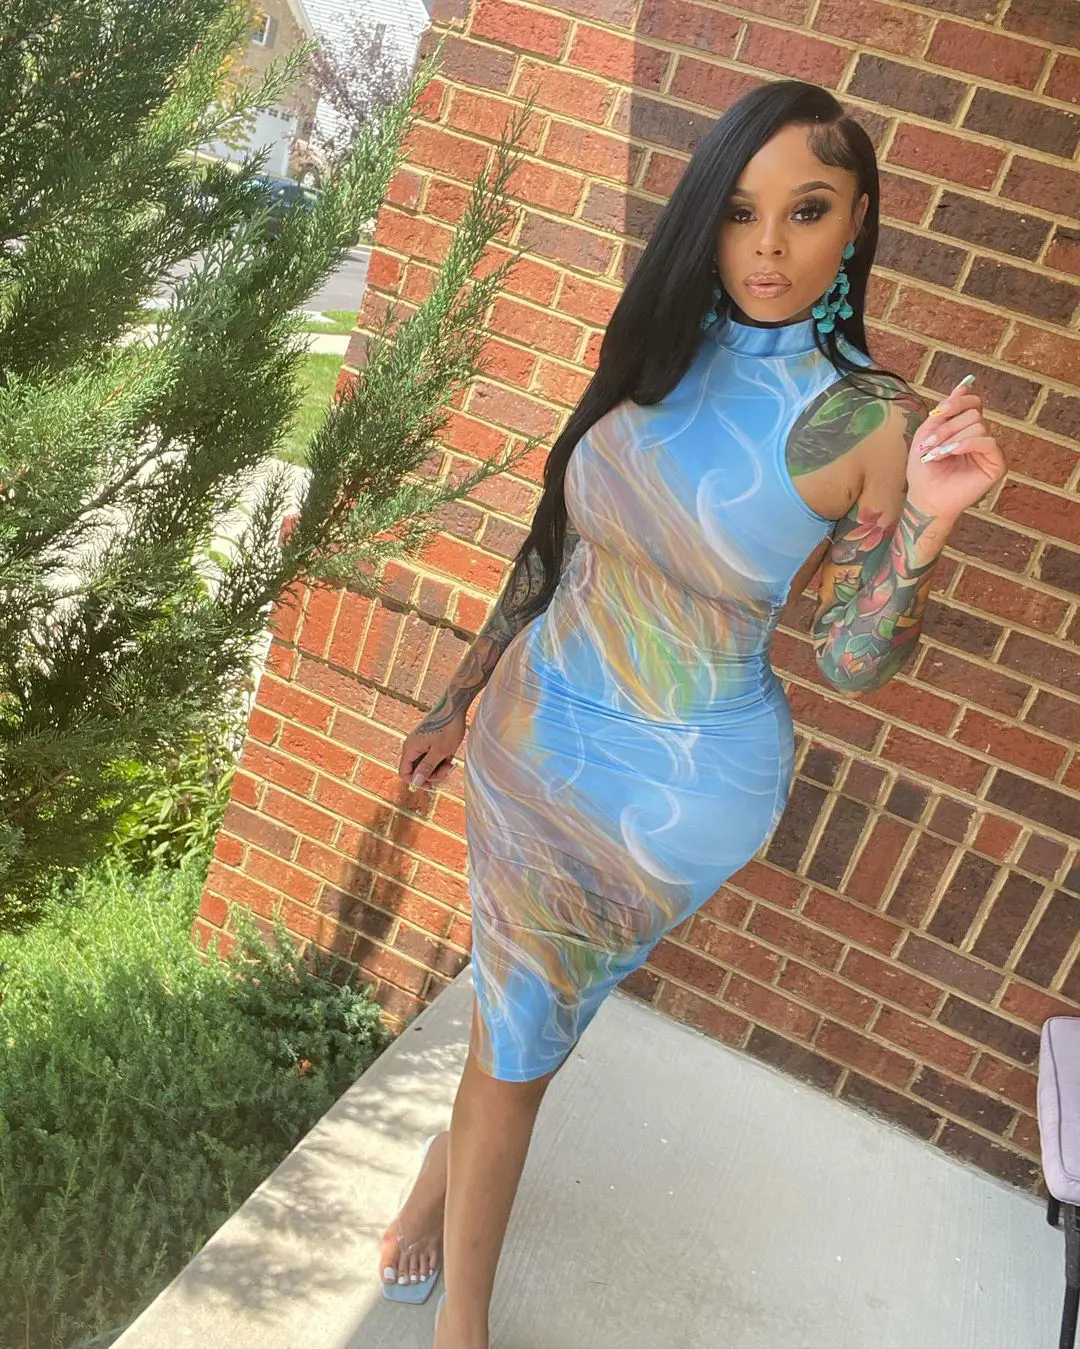 Razor modeled for her clothing brand, flourishing her look with the new arrival Sky. The dress sold out in MajorCollectionsBoutique for $15.